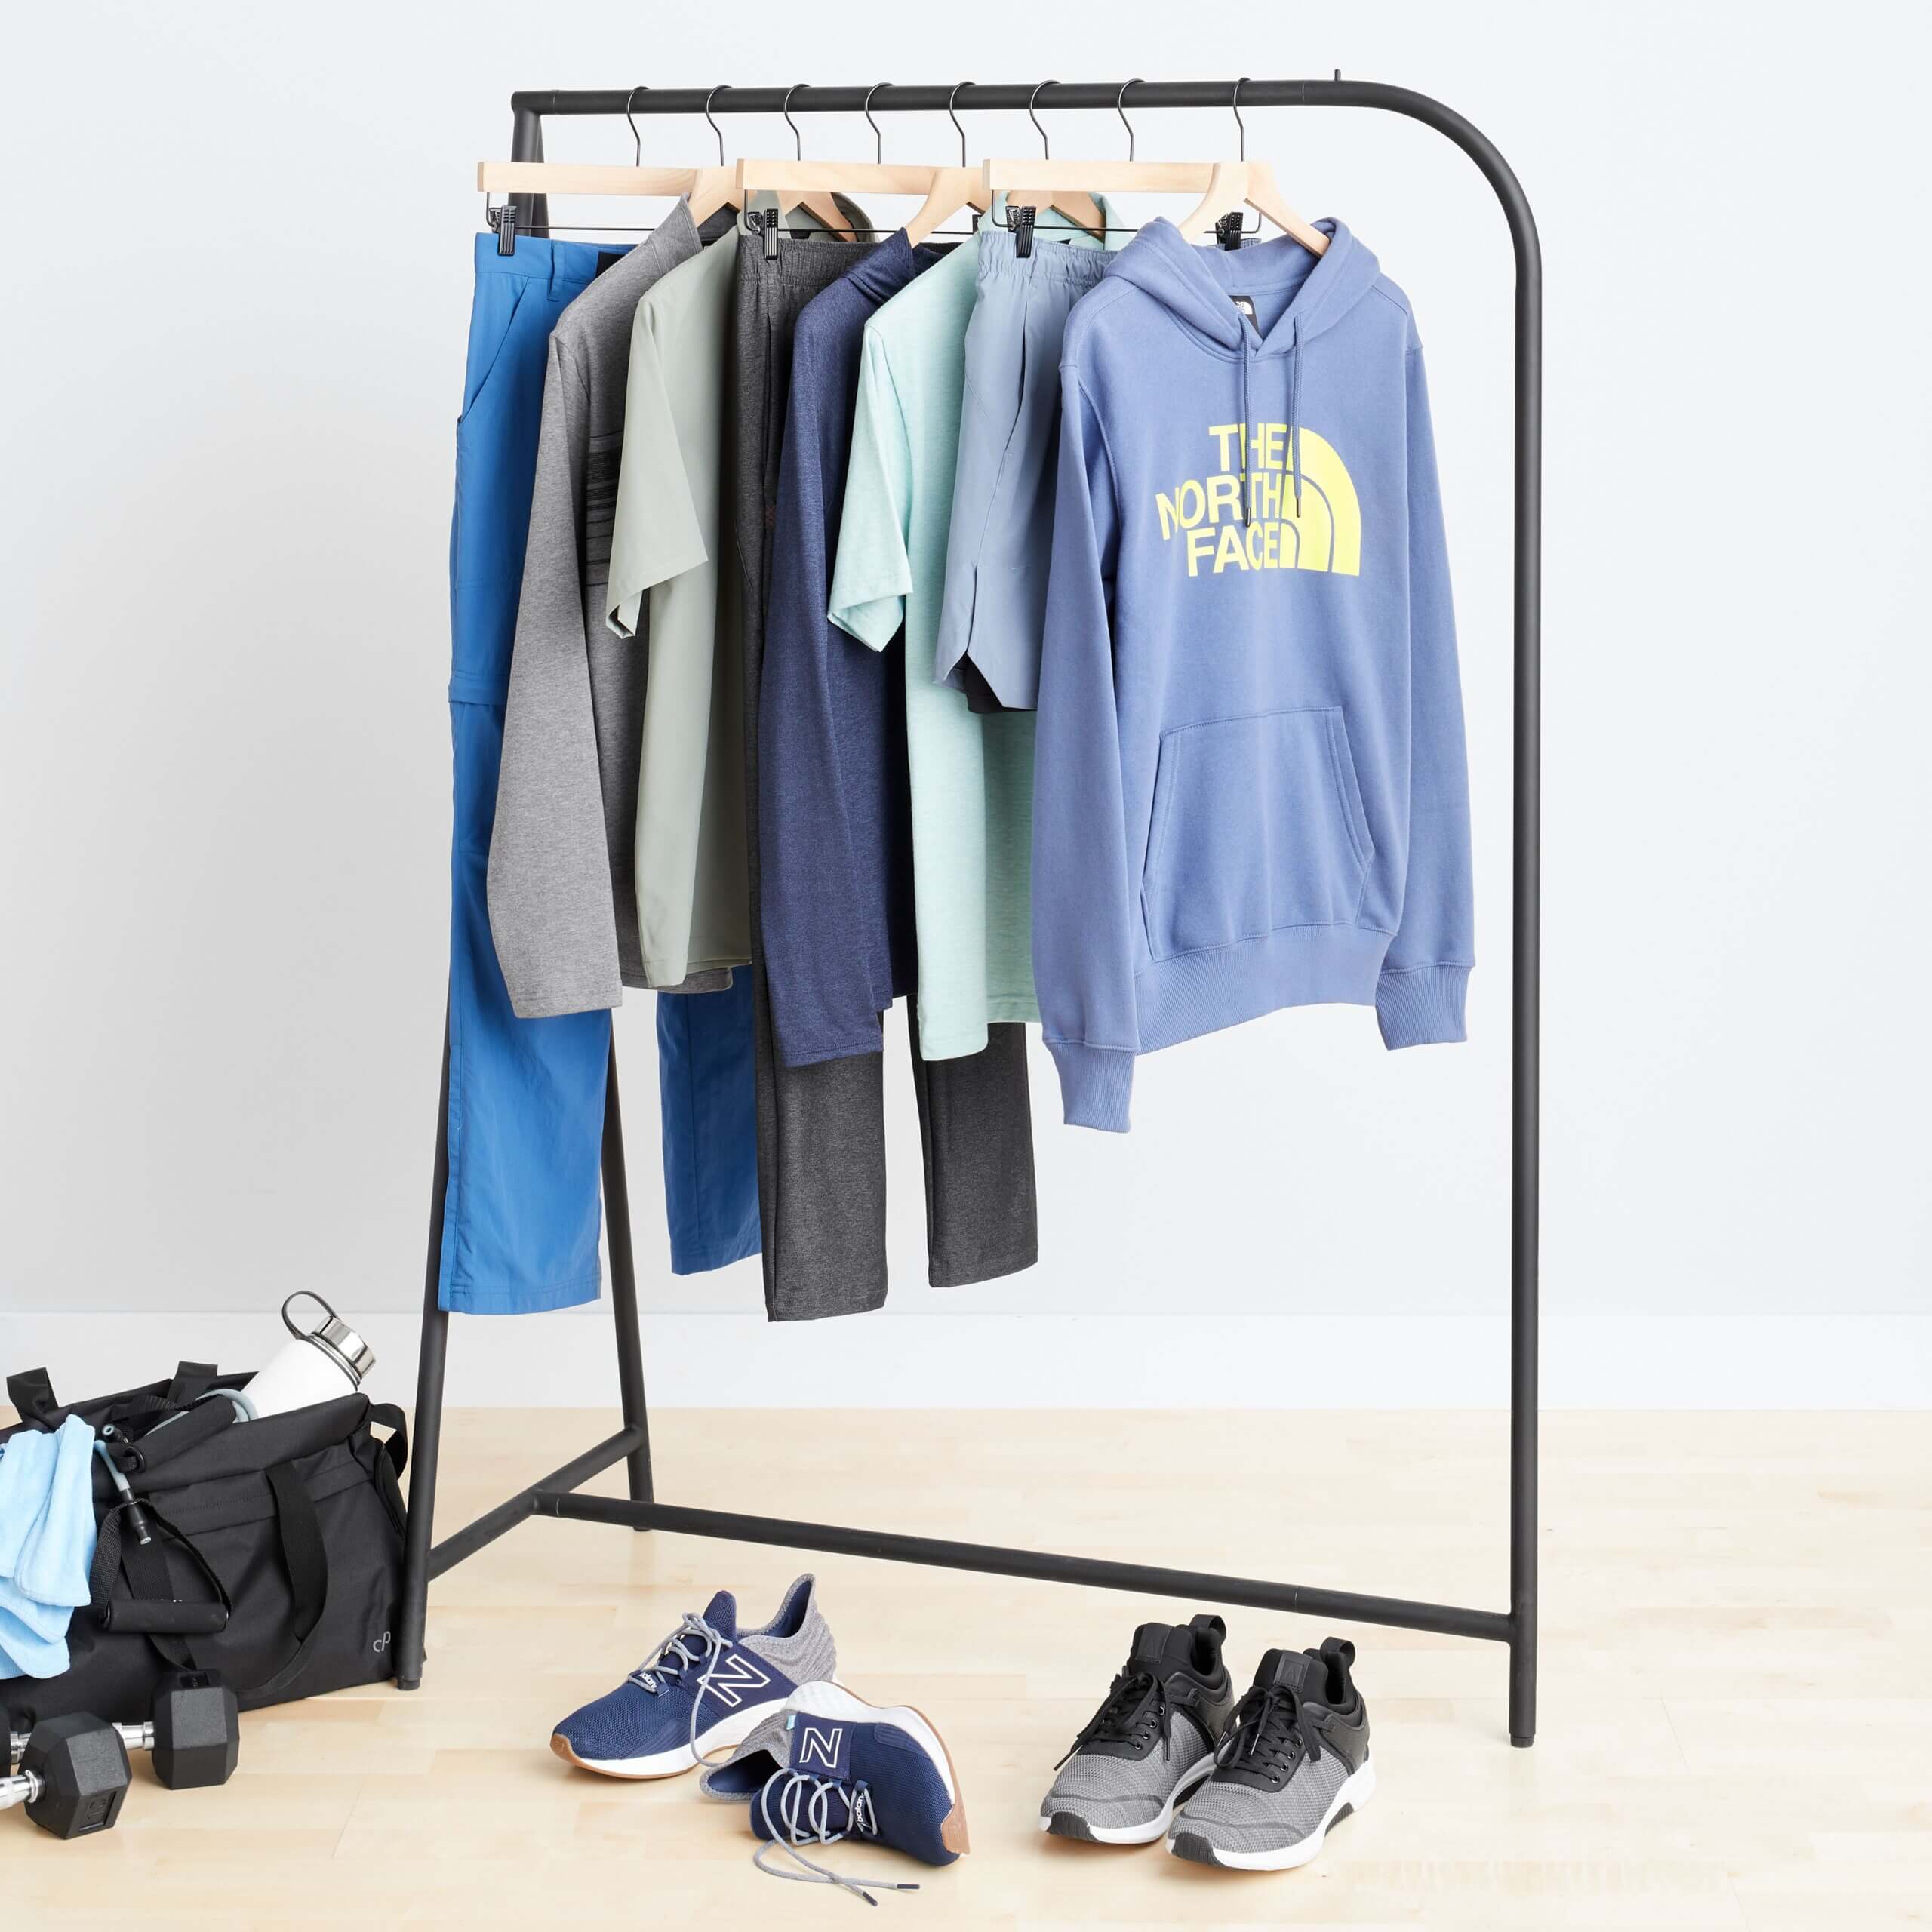 Stitch Fix men's rack image featuring blue hoodie, blue shorts, light short sleeve shirts and blue pants, next to various active sneakers in grey and navy, as well as weights on the floor.